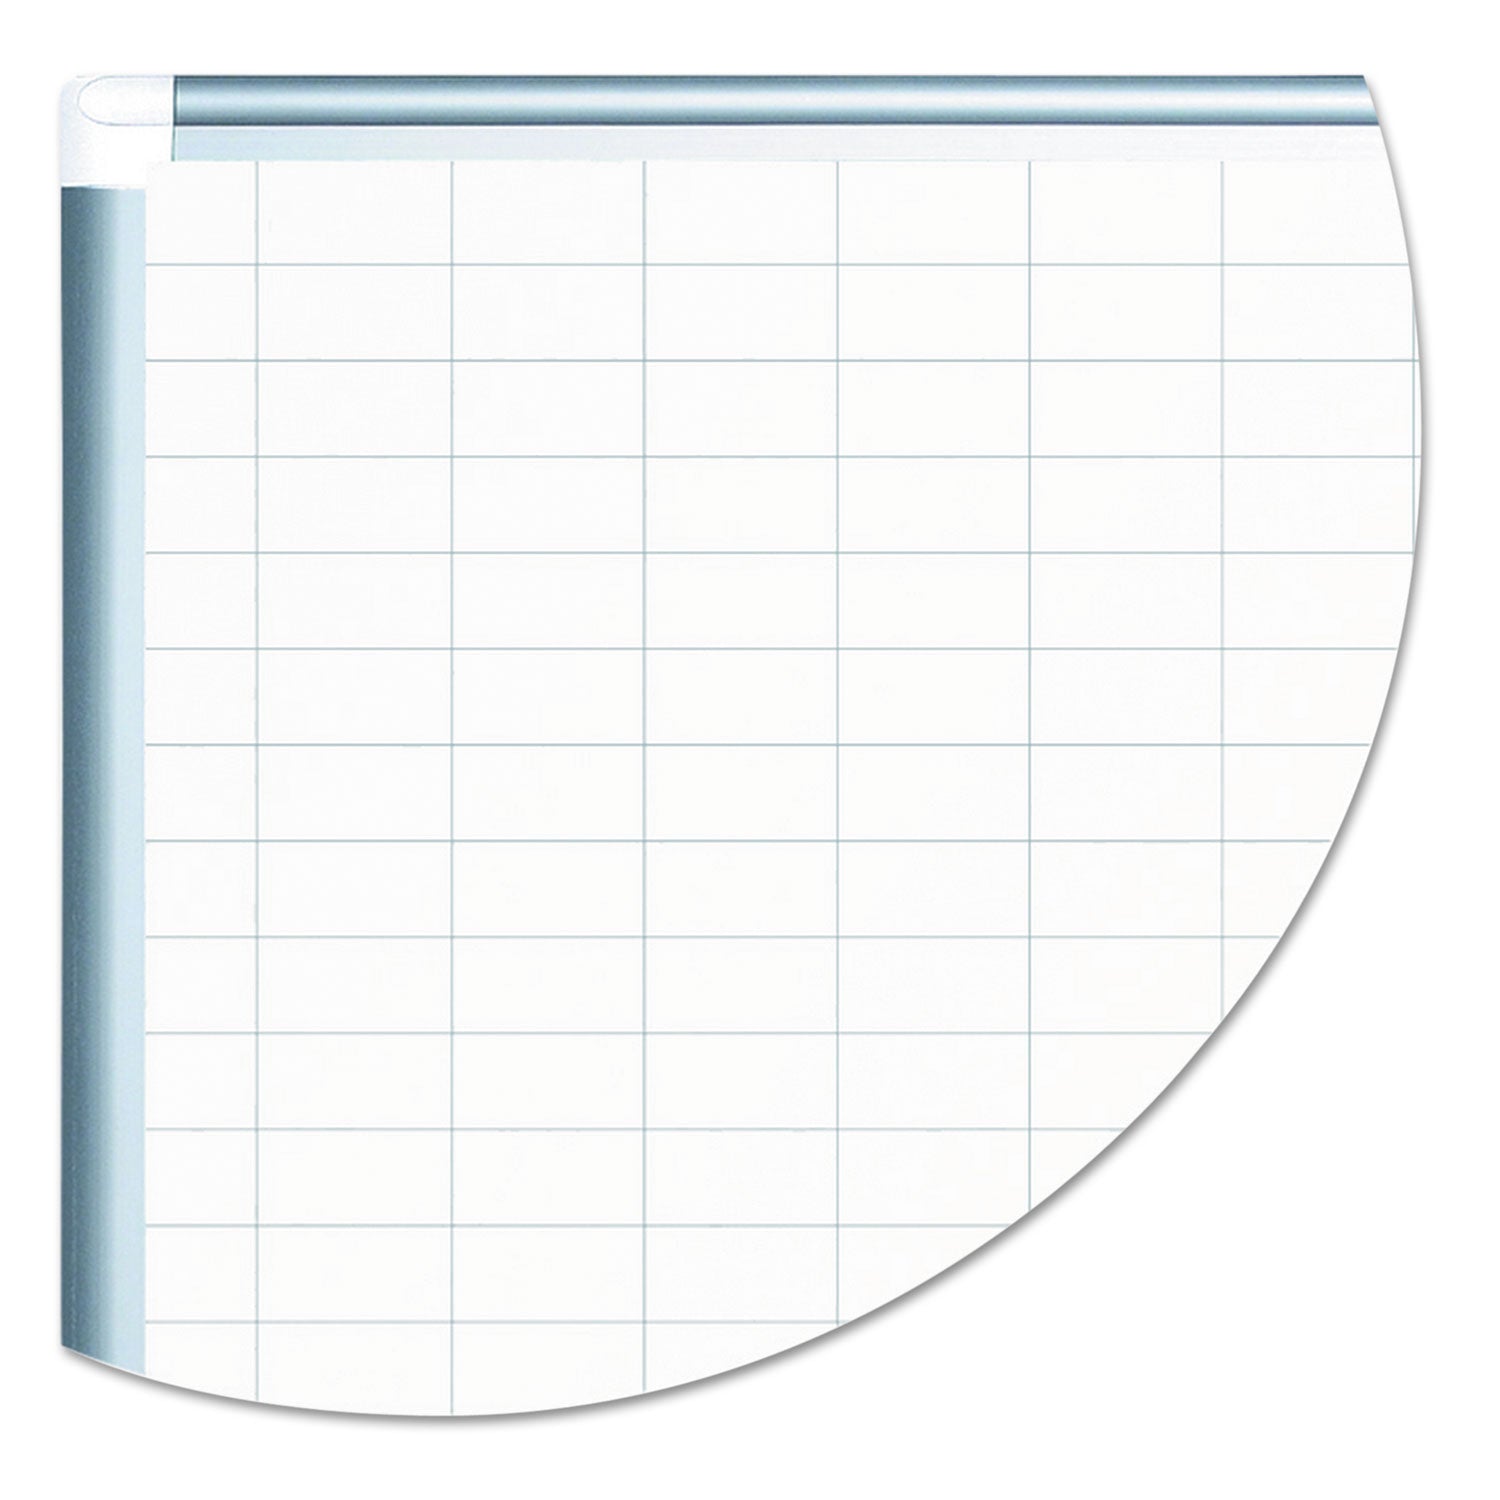 Gridded Magnetic Steel Dry Erase Planning Board with Accessories, 1 x 2 Grid, 48 x 36, White Surface, Silver Aluminum Frame - 